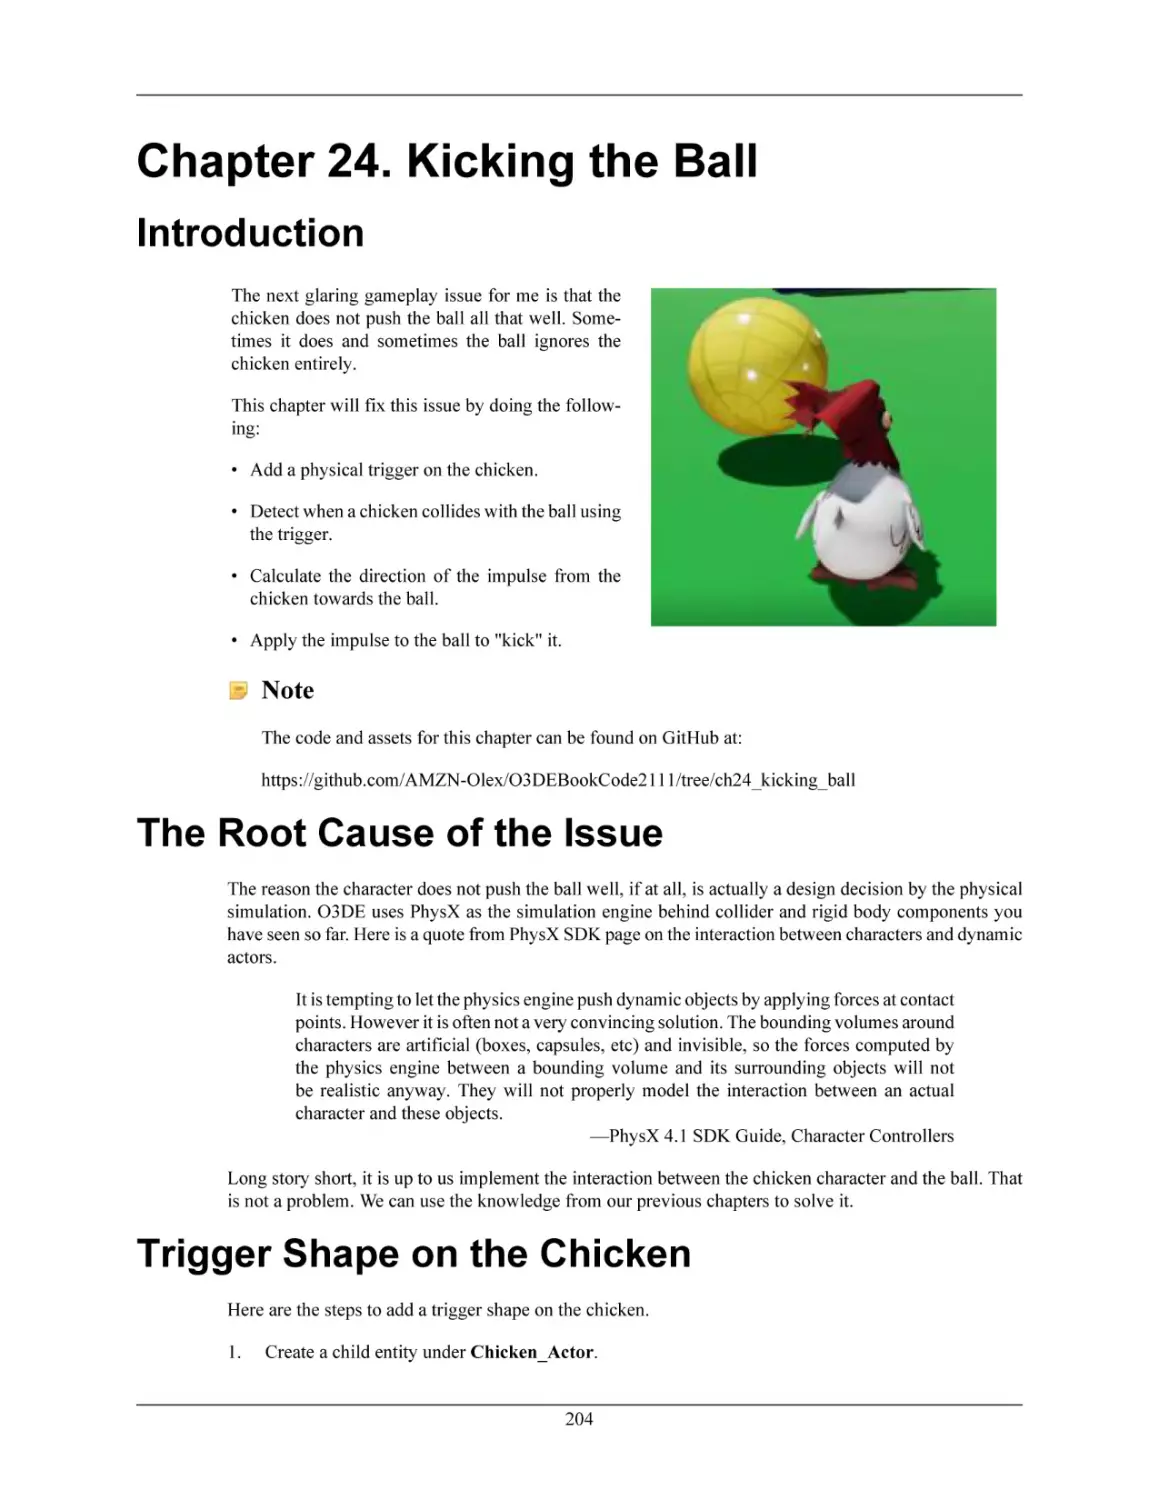 Chapter 24. Kicking the Ball
Introduction
The Root Cause of the Issue
Trigger Shape on the Chicken